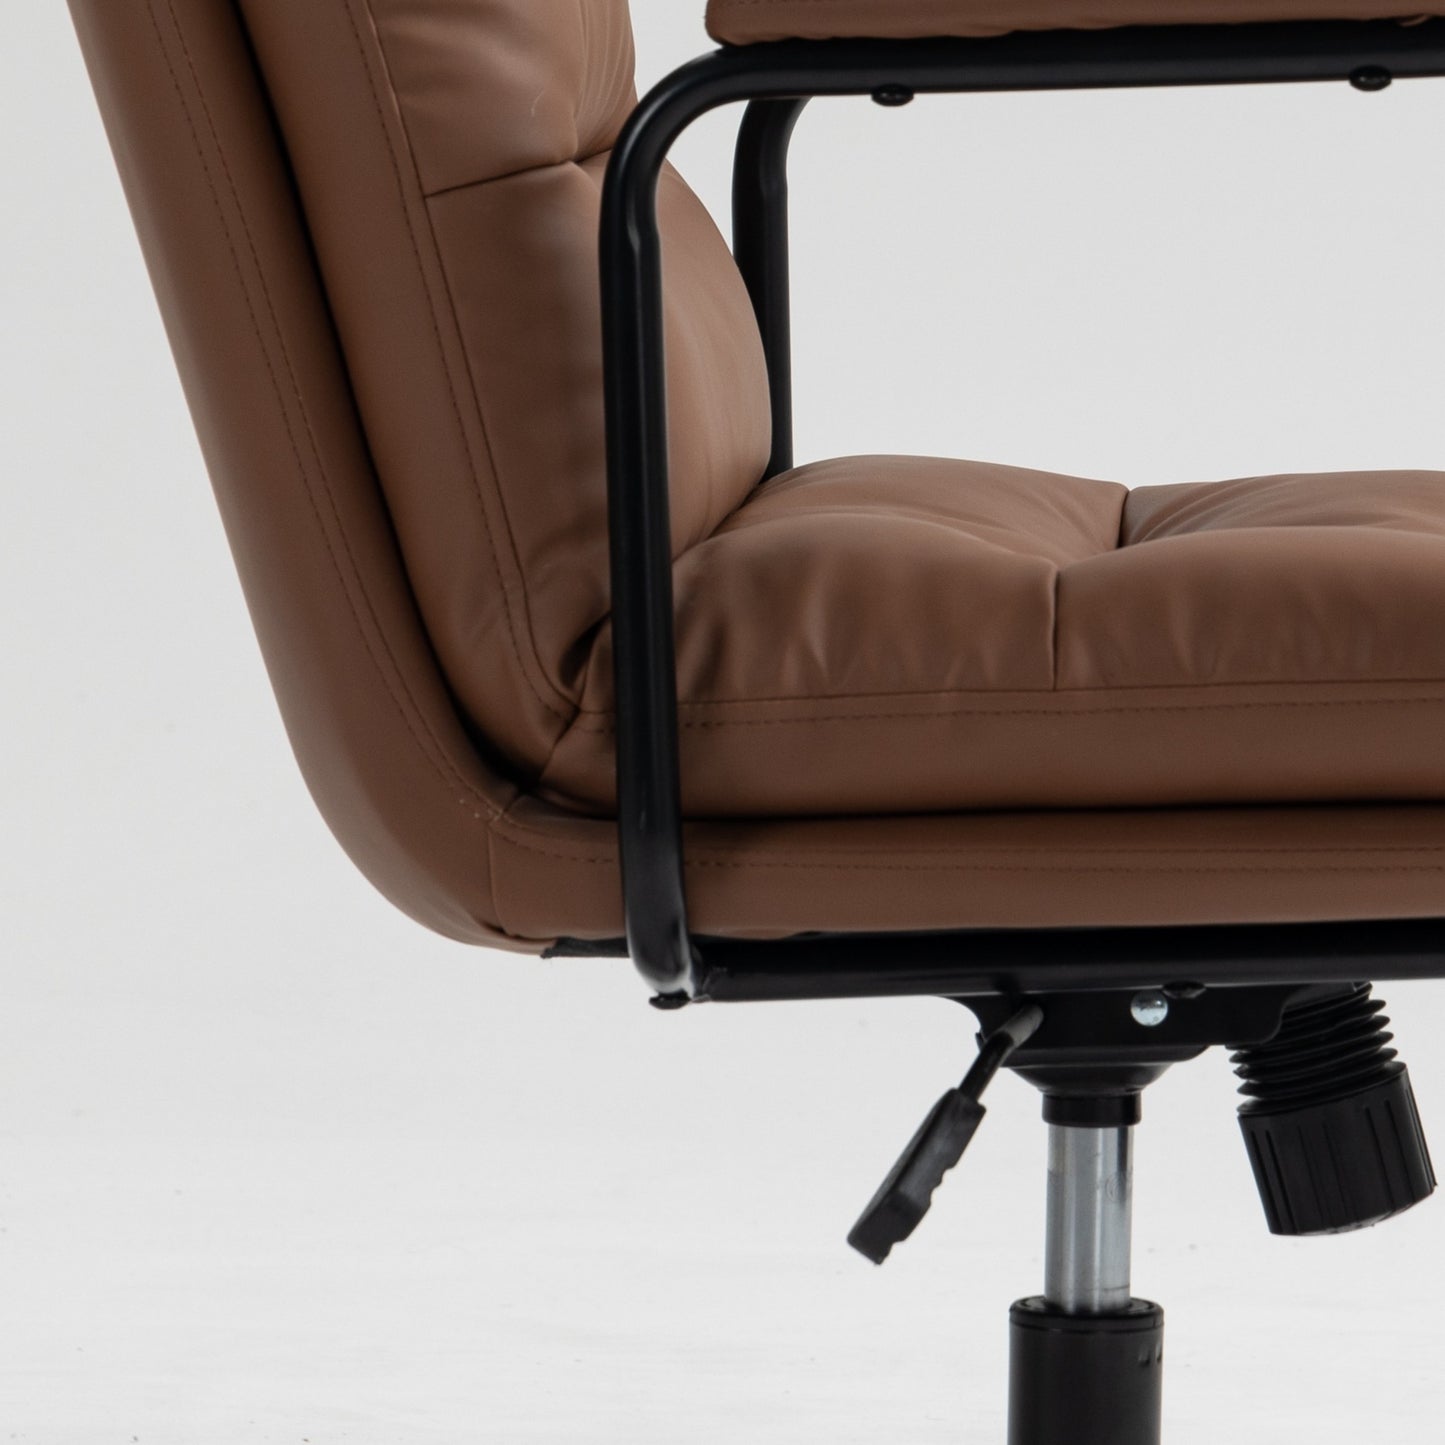 Royton Computer Rolling Swivel Chair in Brown PU Leather